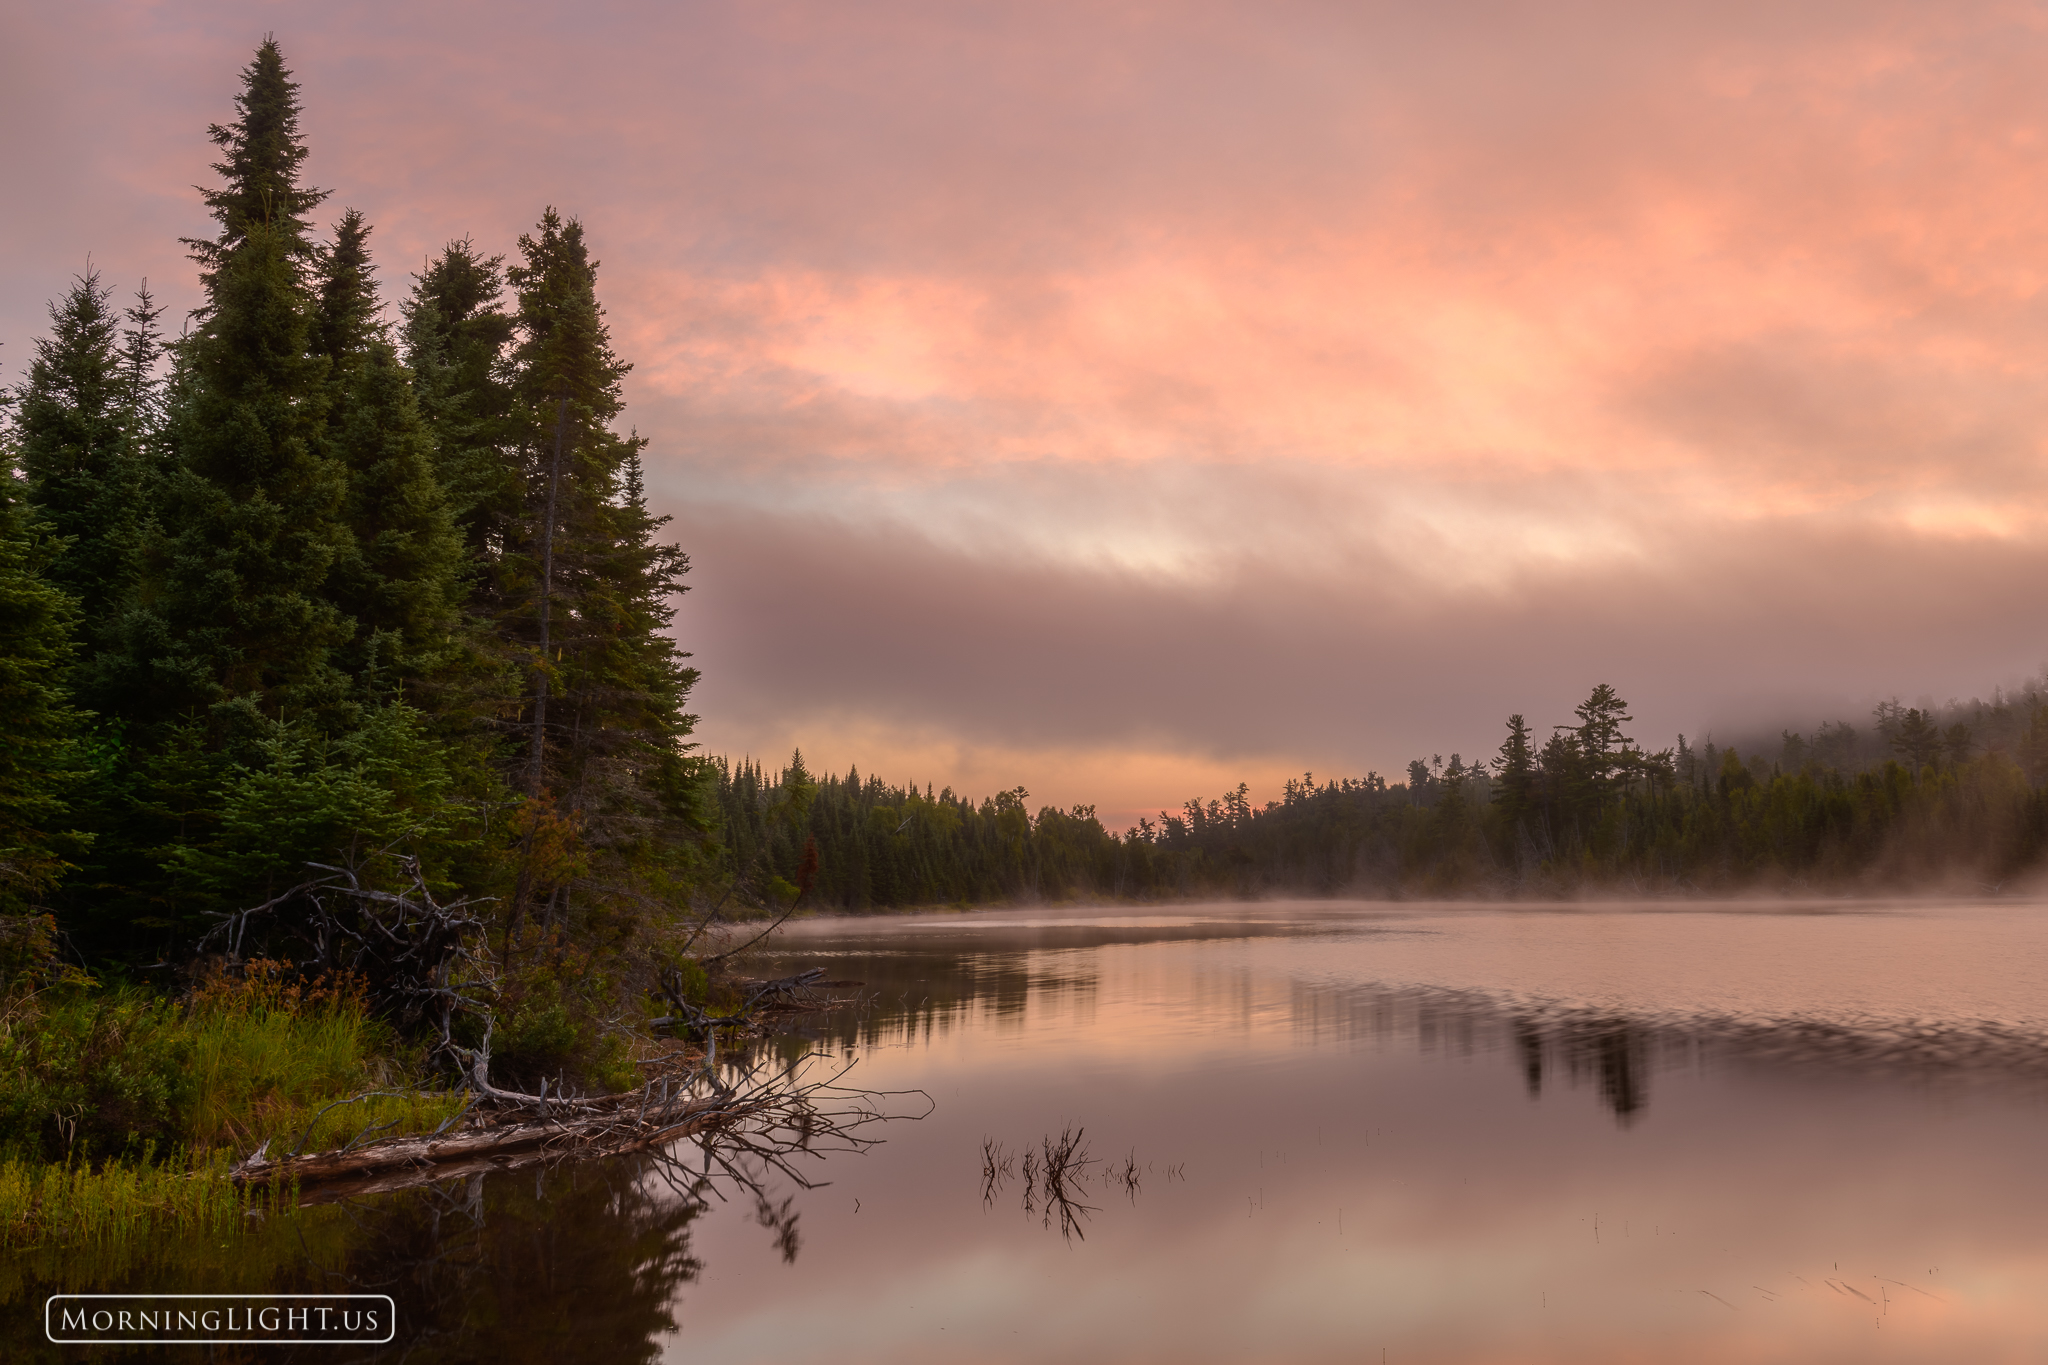 A calm evening in the Boundary Waters Canoe Area just barely south of the Canadian border.